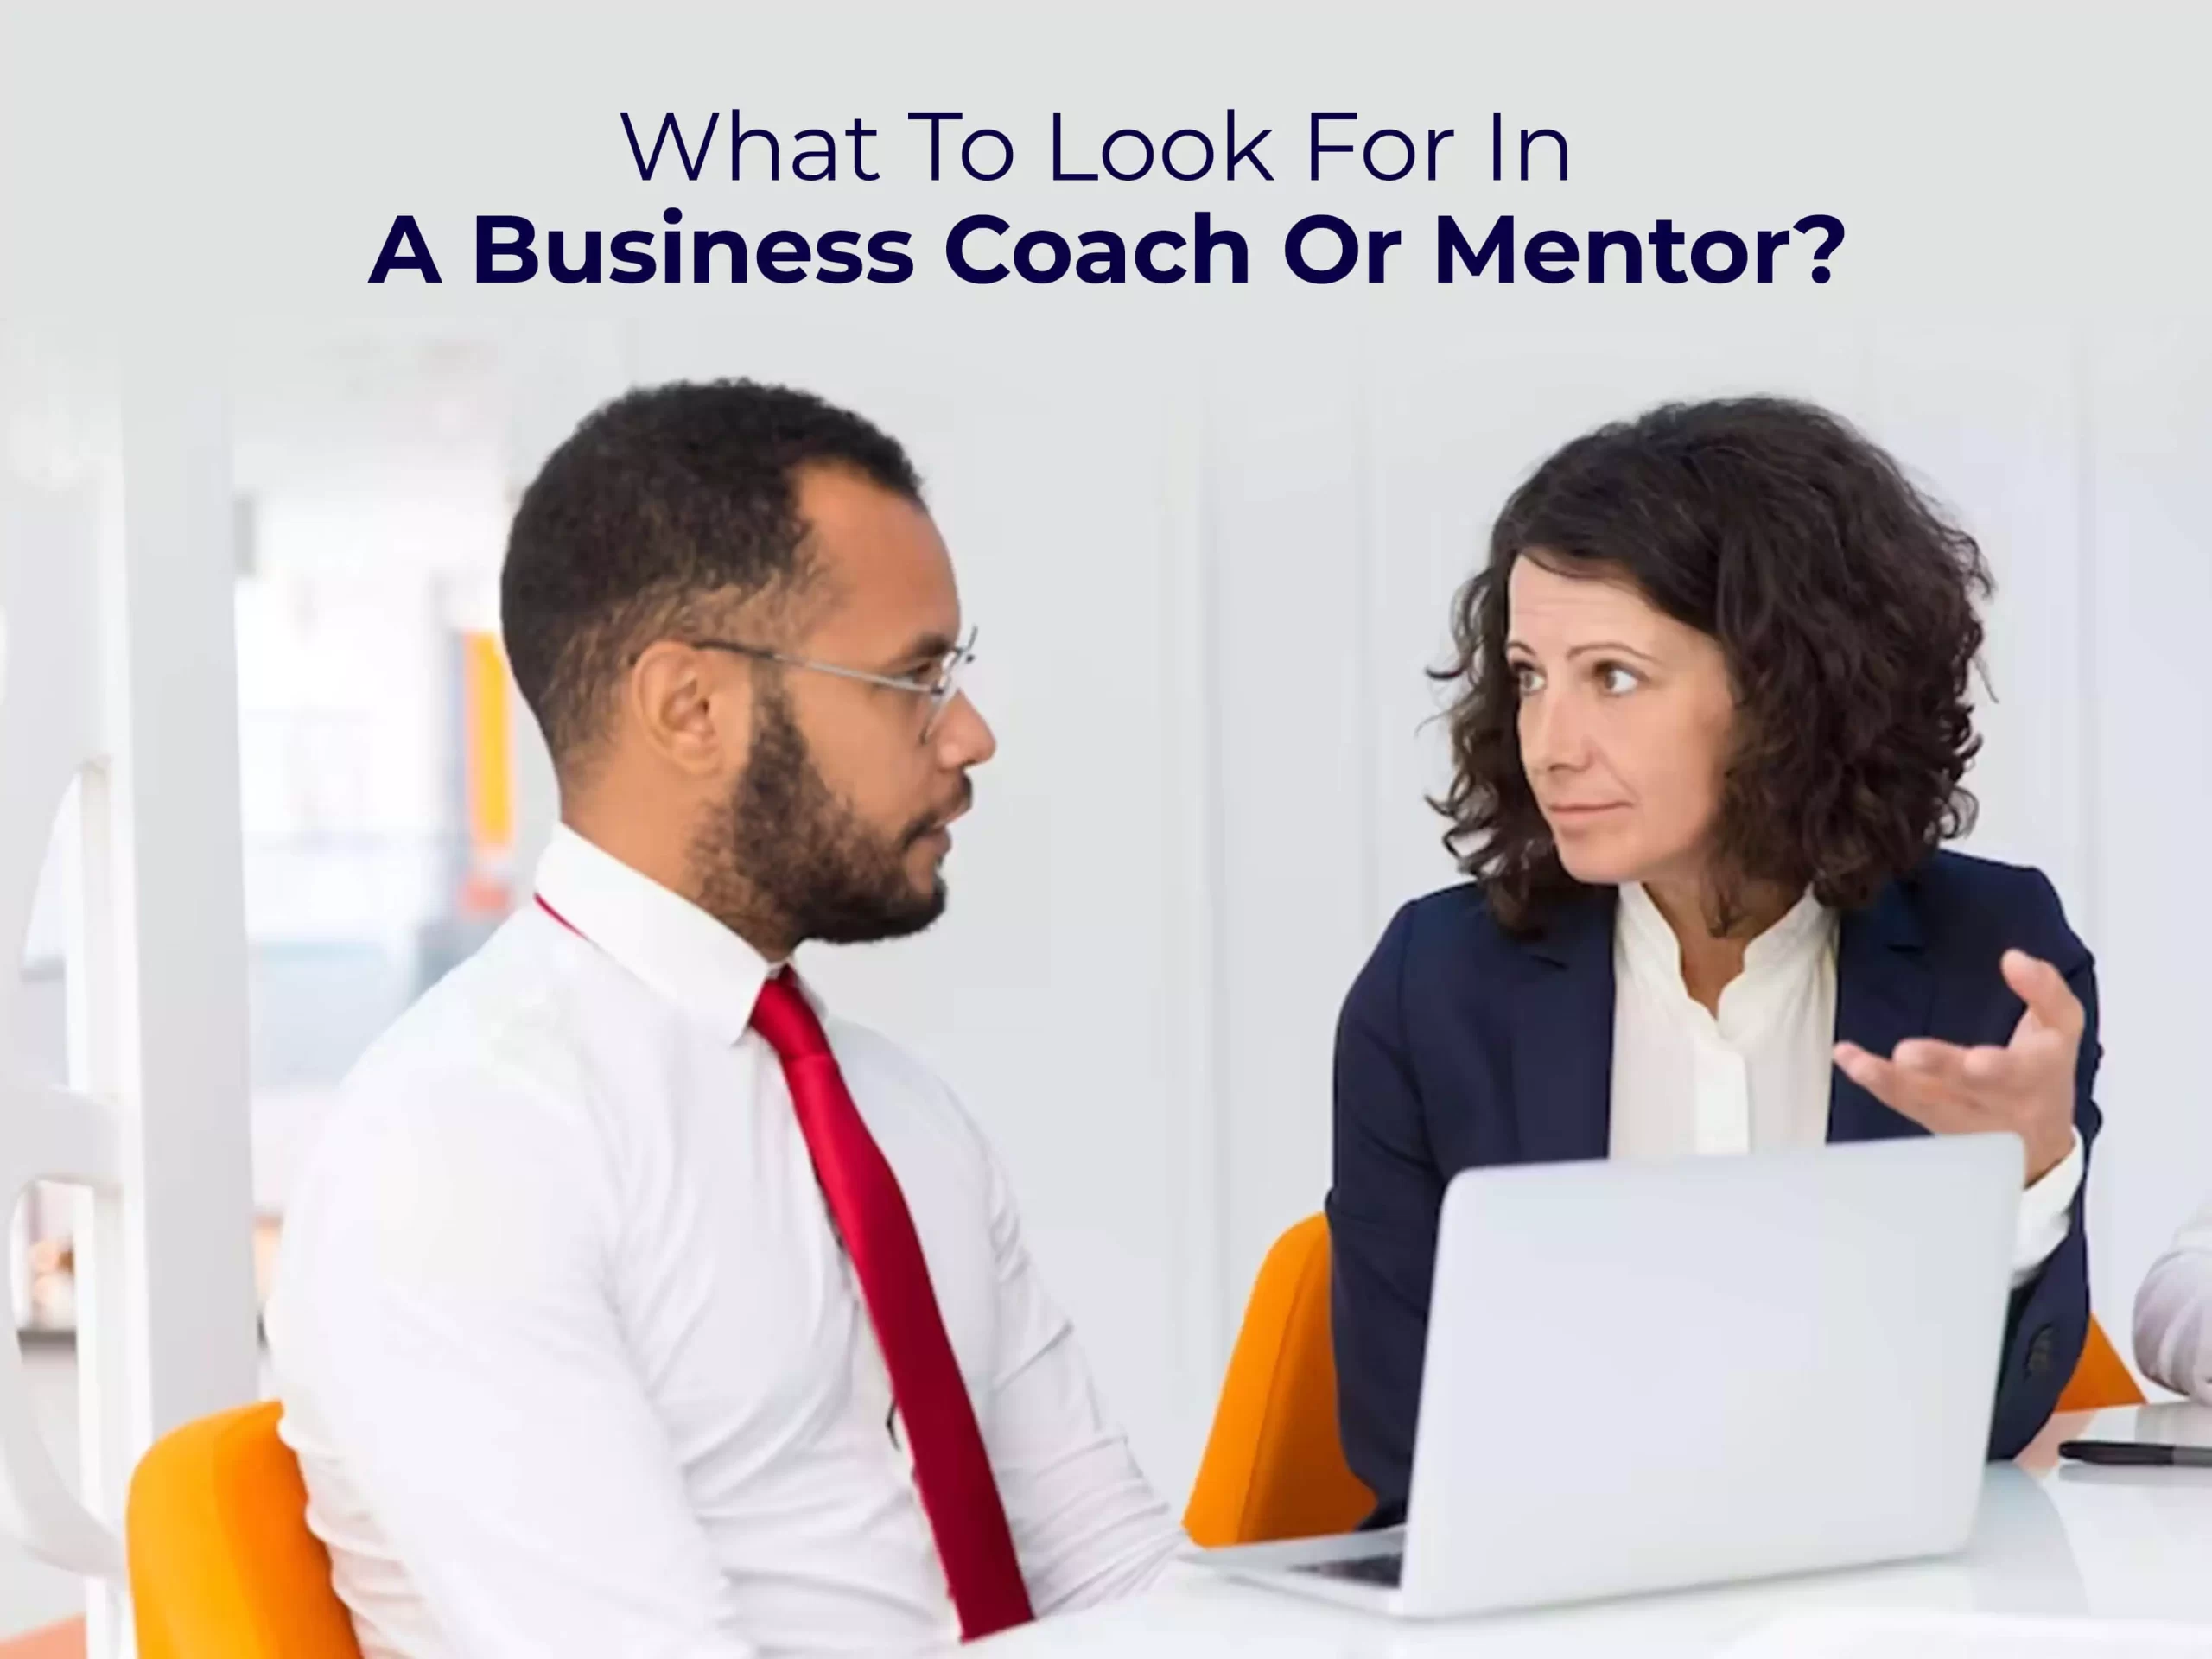 What To Look For In A Business Coach Or Mentor?